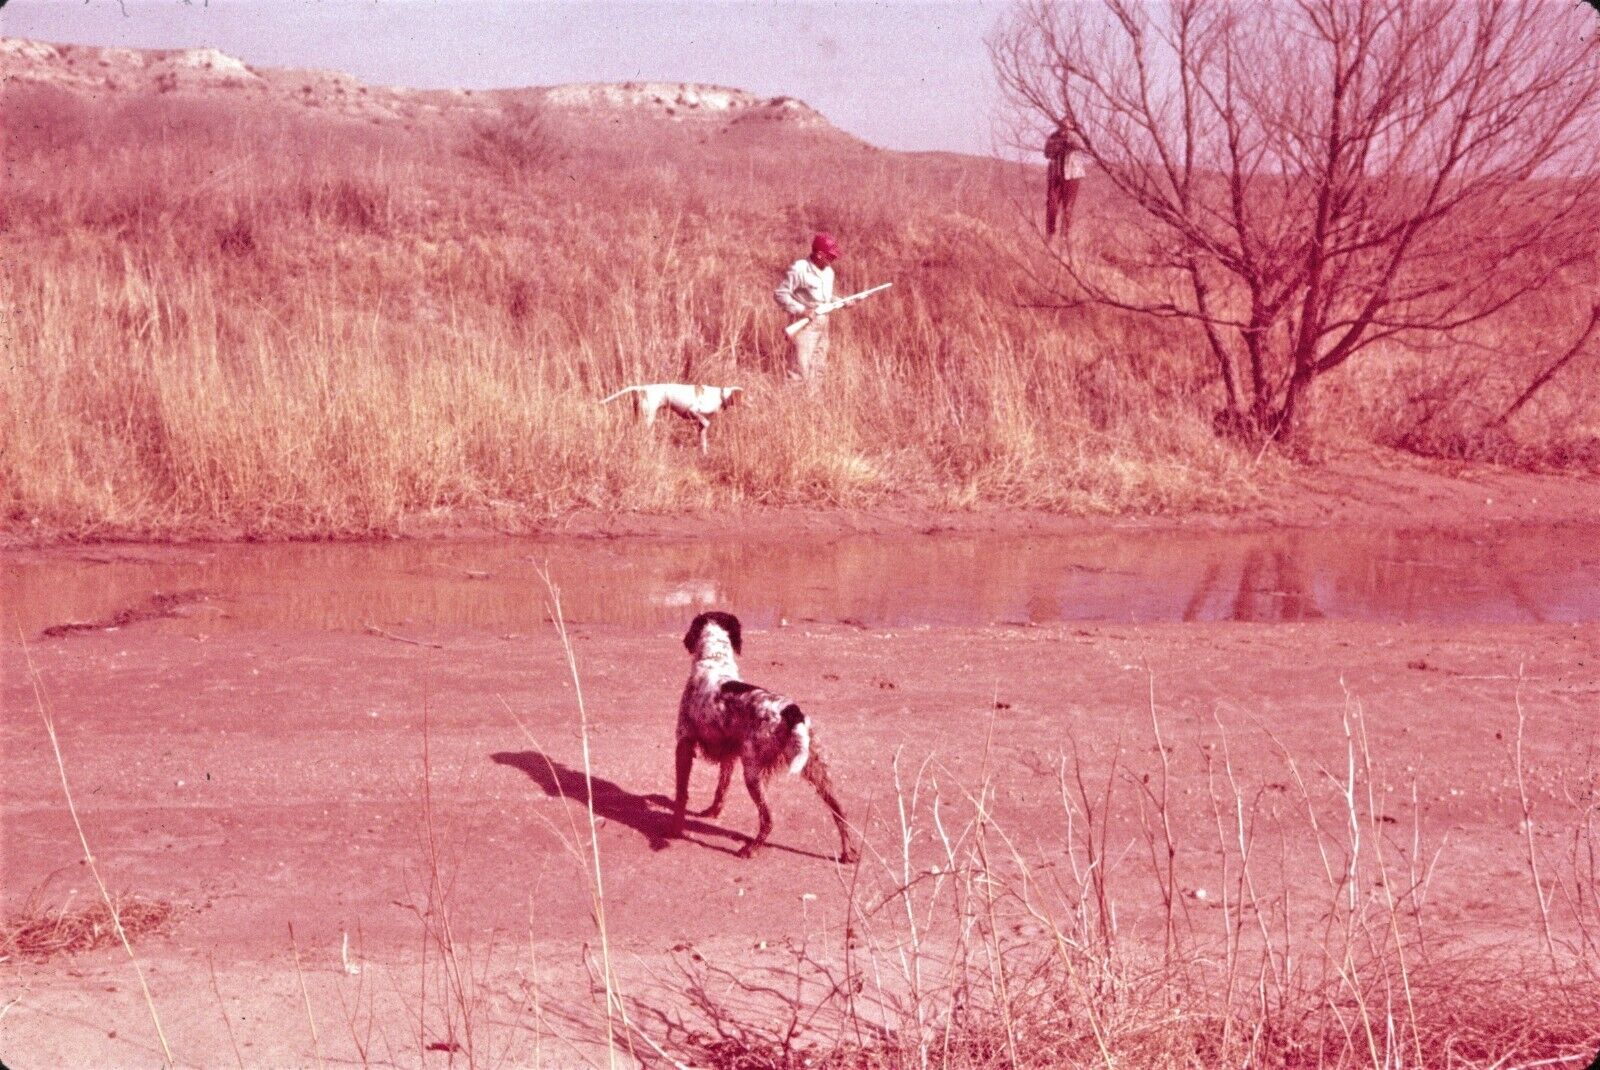 1959 Red Hue Men Hunting with Dogs Pointing Texas February Vintage 35mm Slide